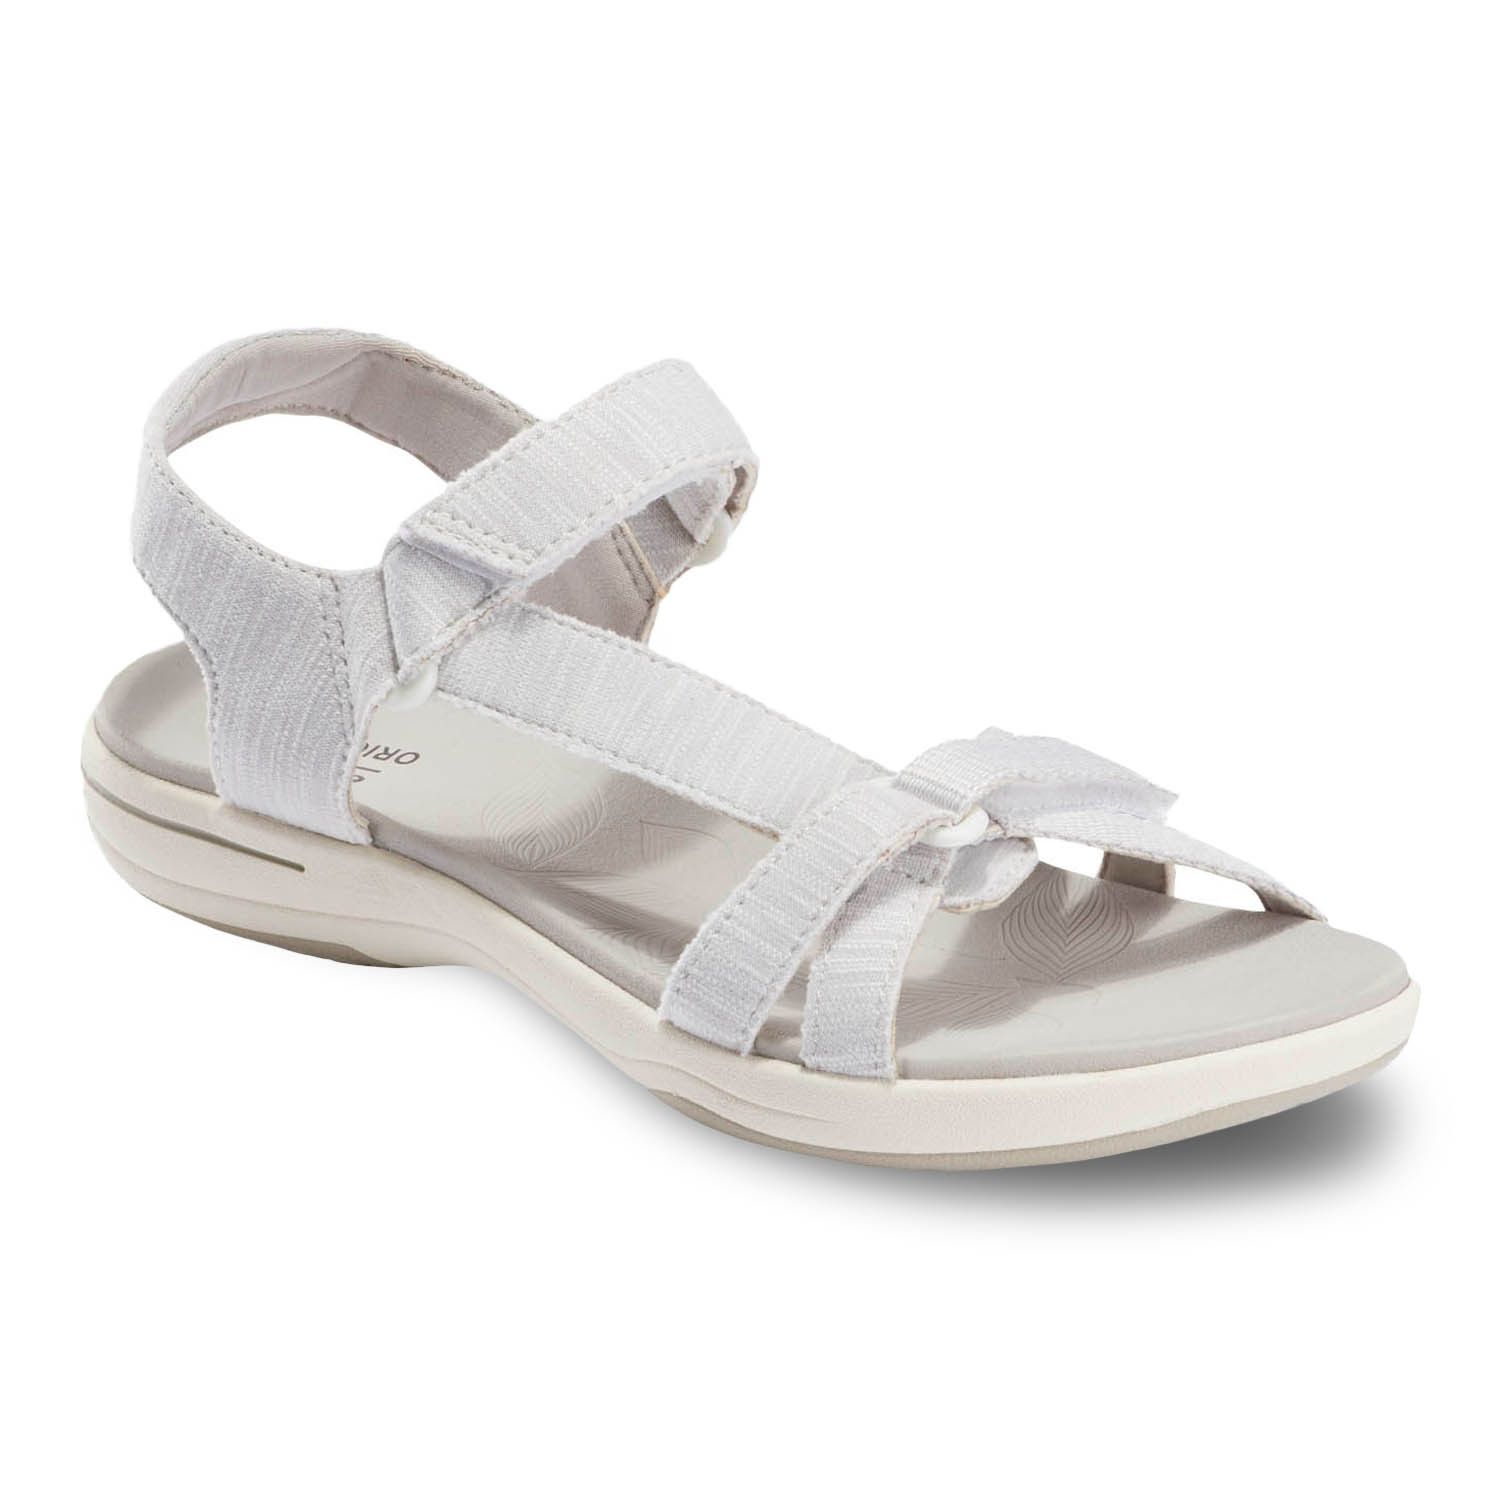 Image for Earth Origins Saru Sparrow Women's Strappy Sandals at Kohl's.